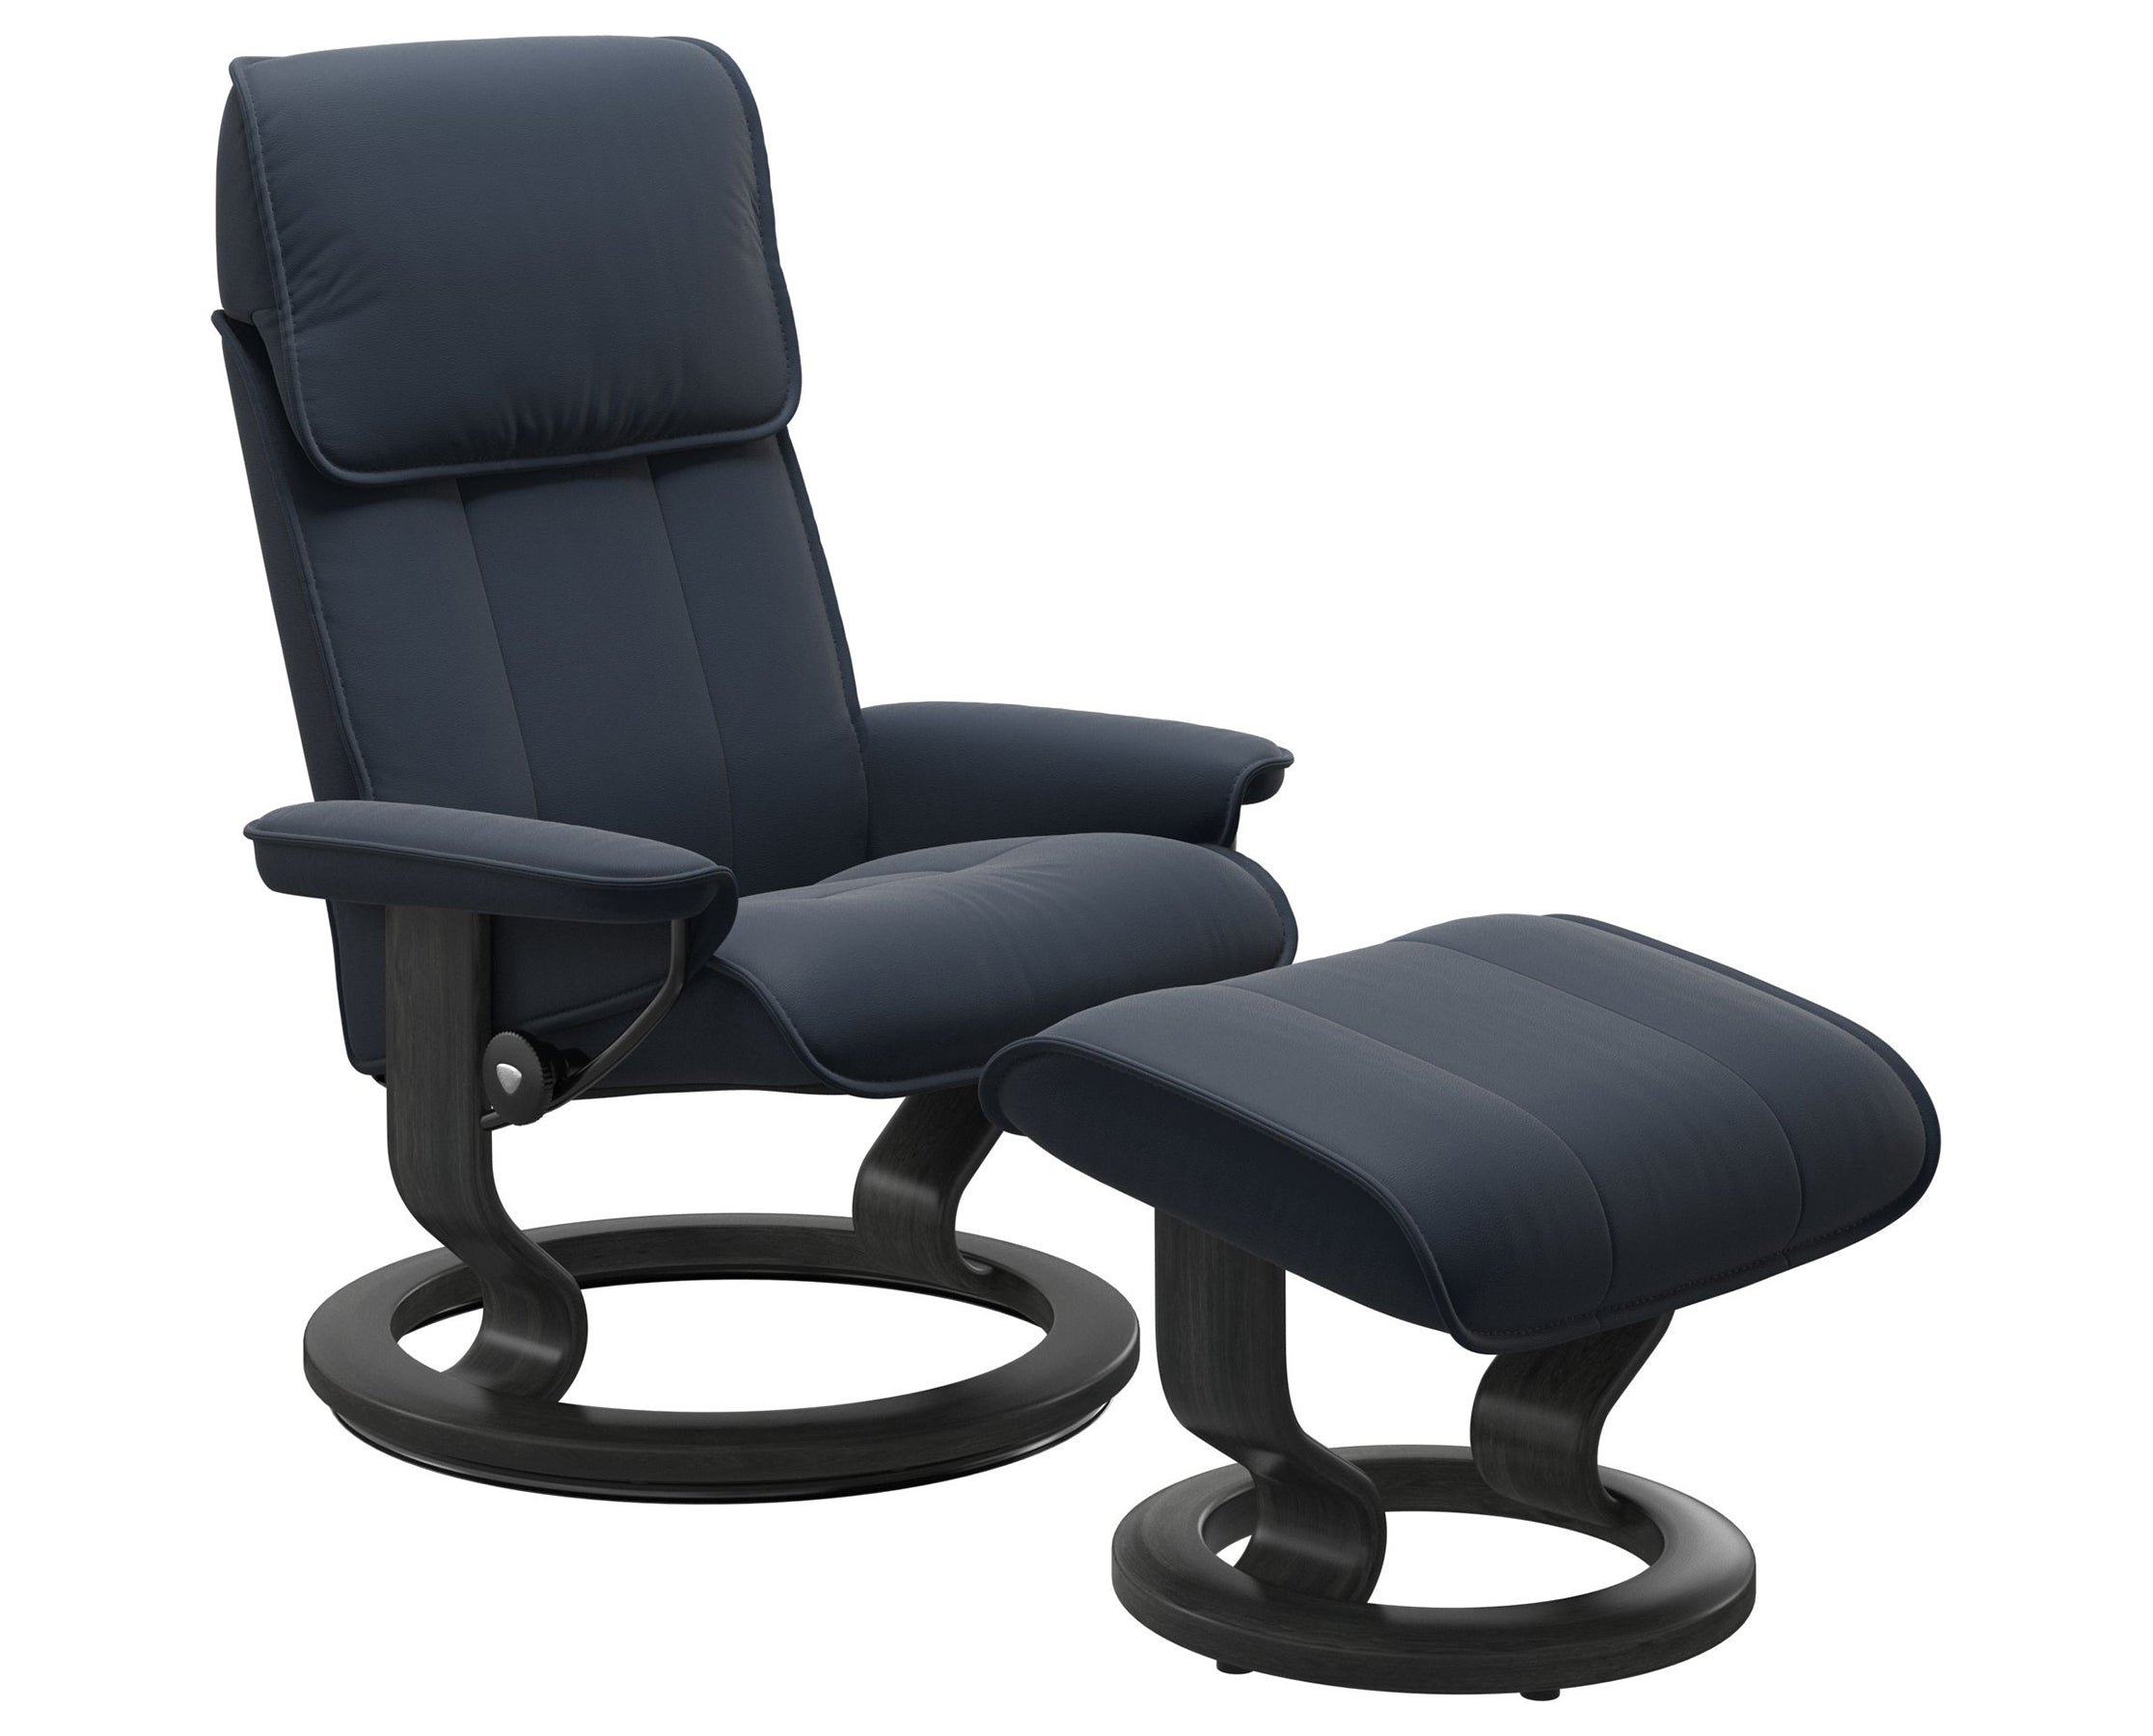 Paloma Leather Oxford Blue M/L and Grey Base | Stressless Admiral Classic Recliner | Valley Ridge Furniture